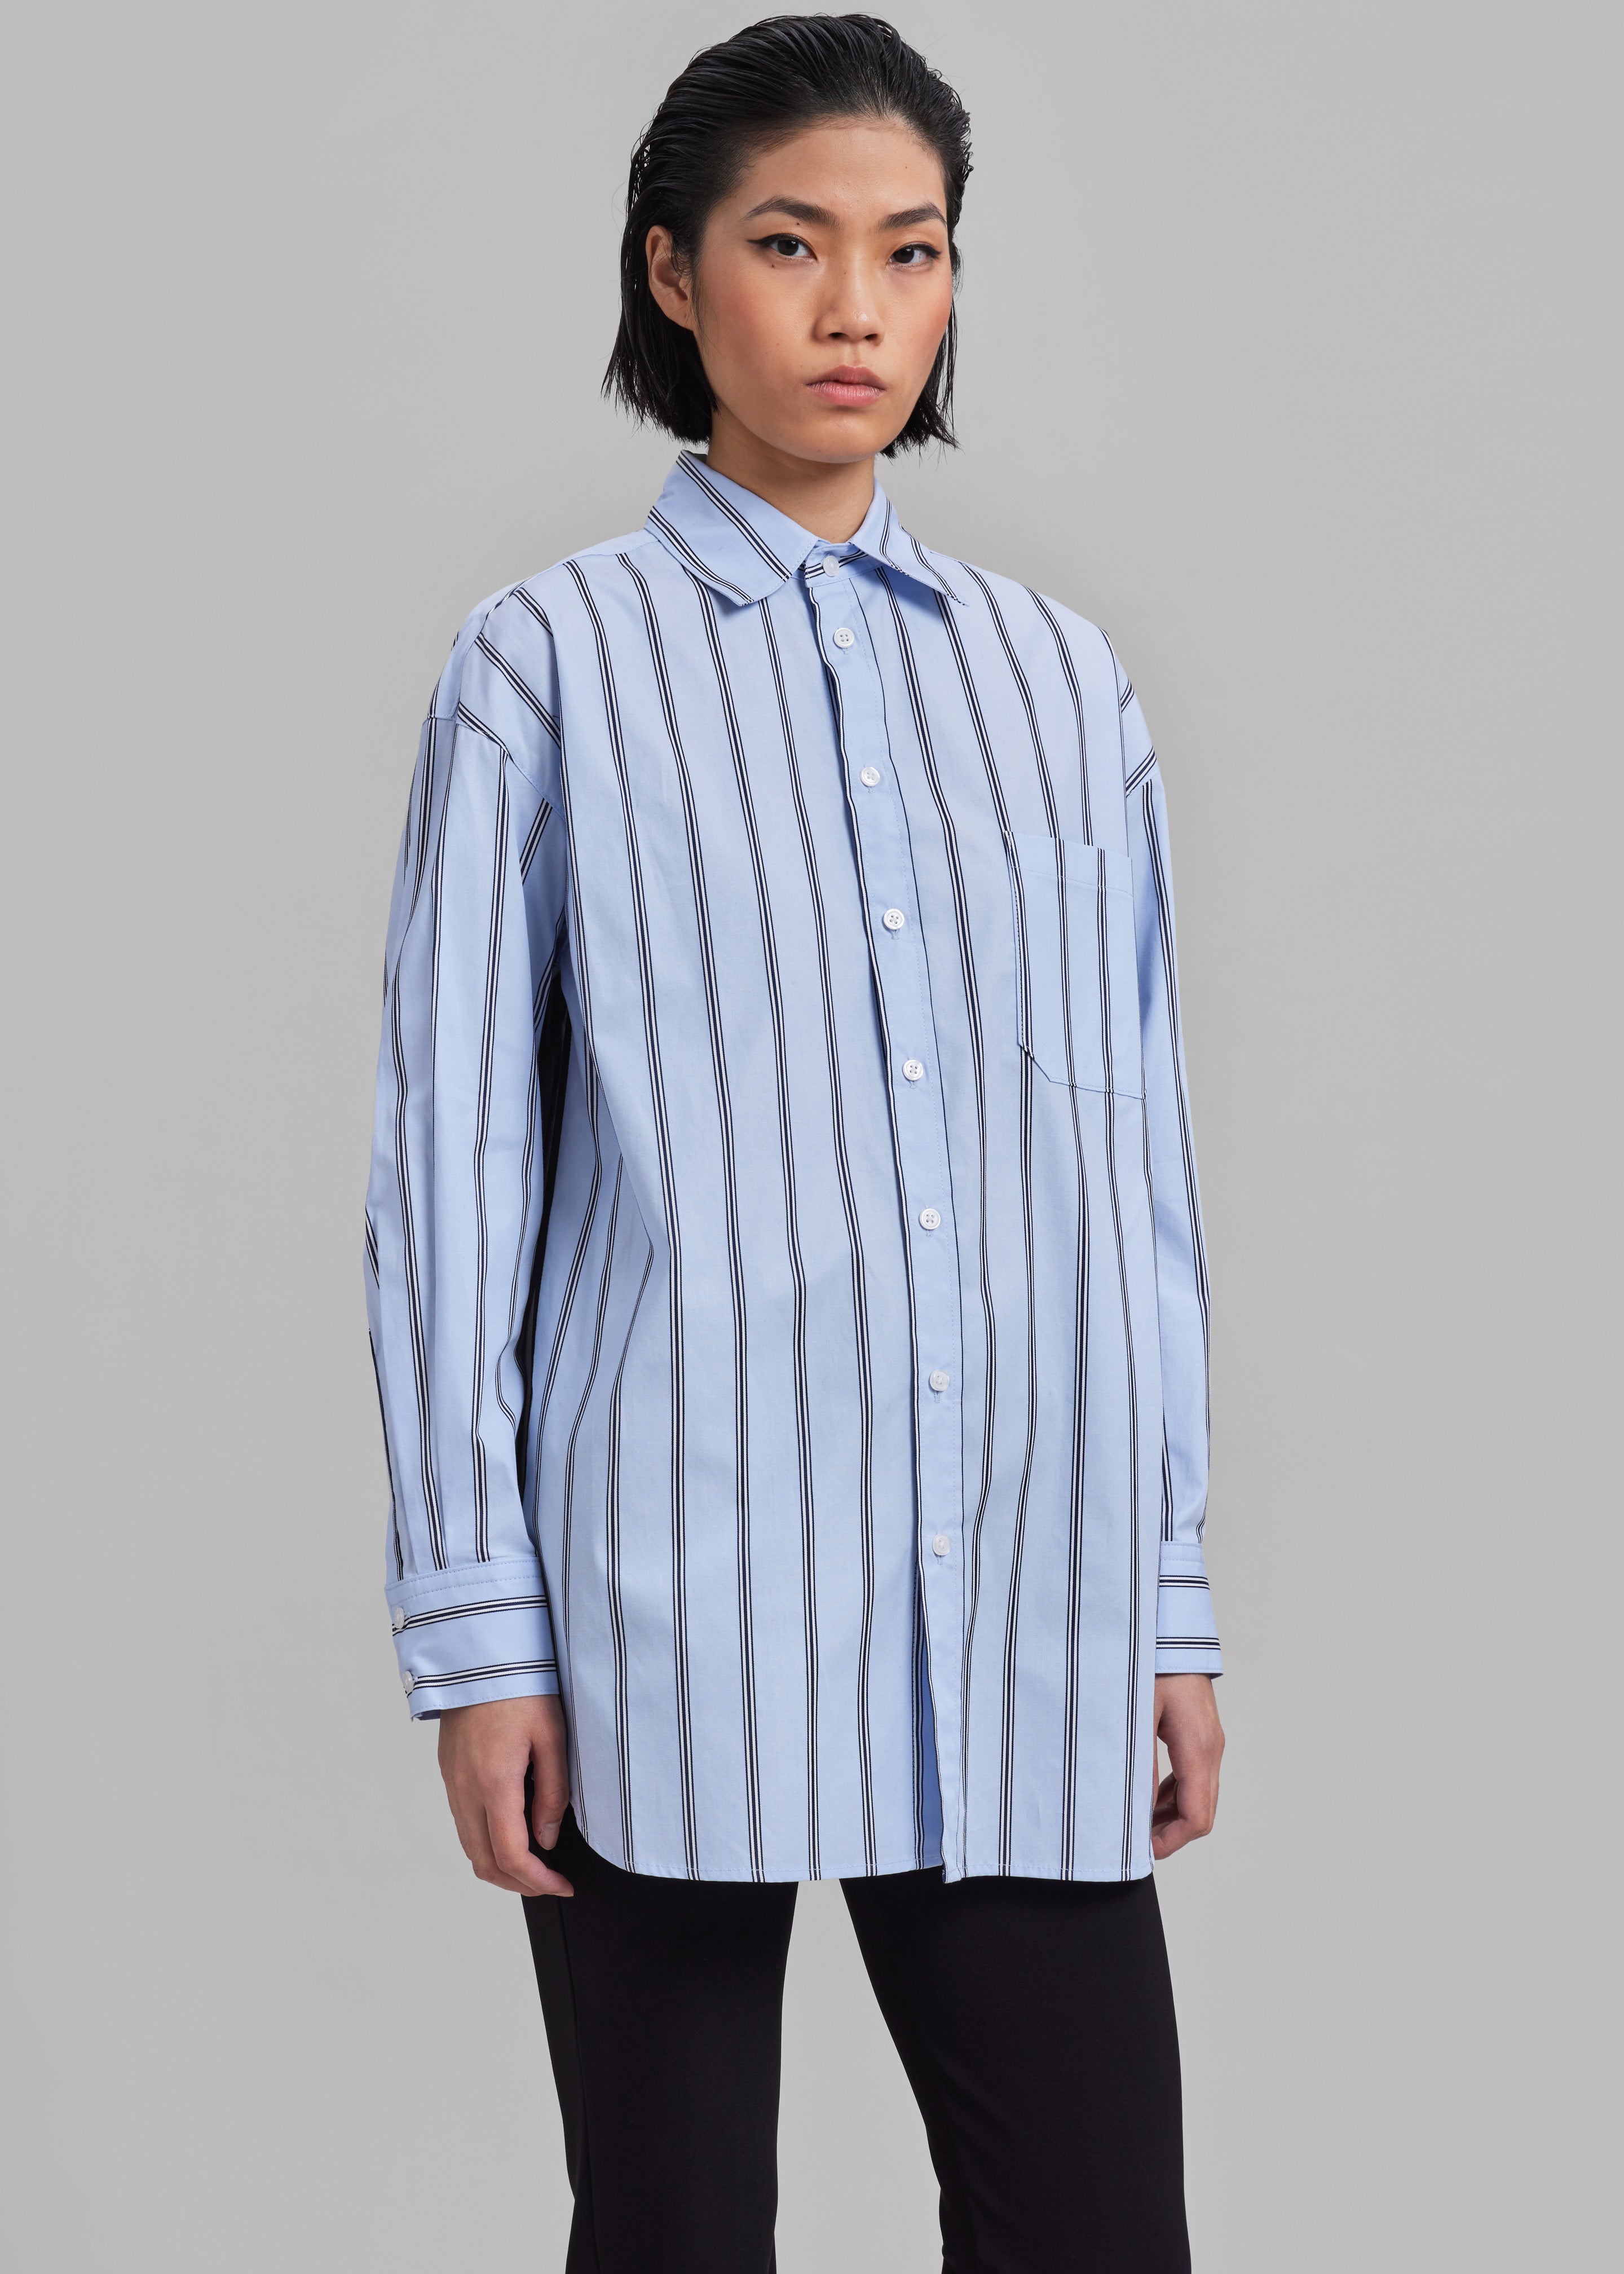 Puppets And Puppets Cronenberg Oversized Striped Button Down Shirt - Blue Stripe - 6